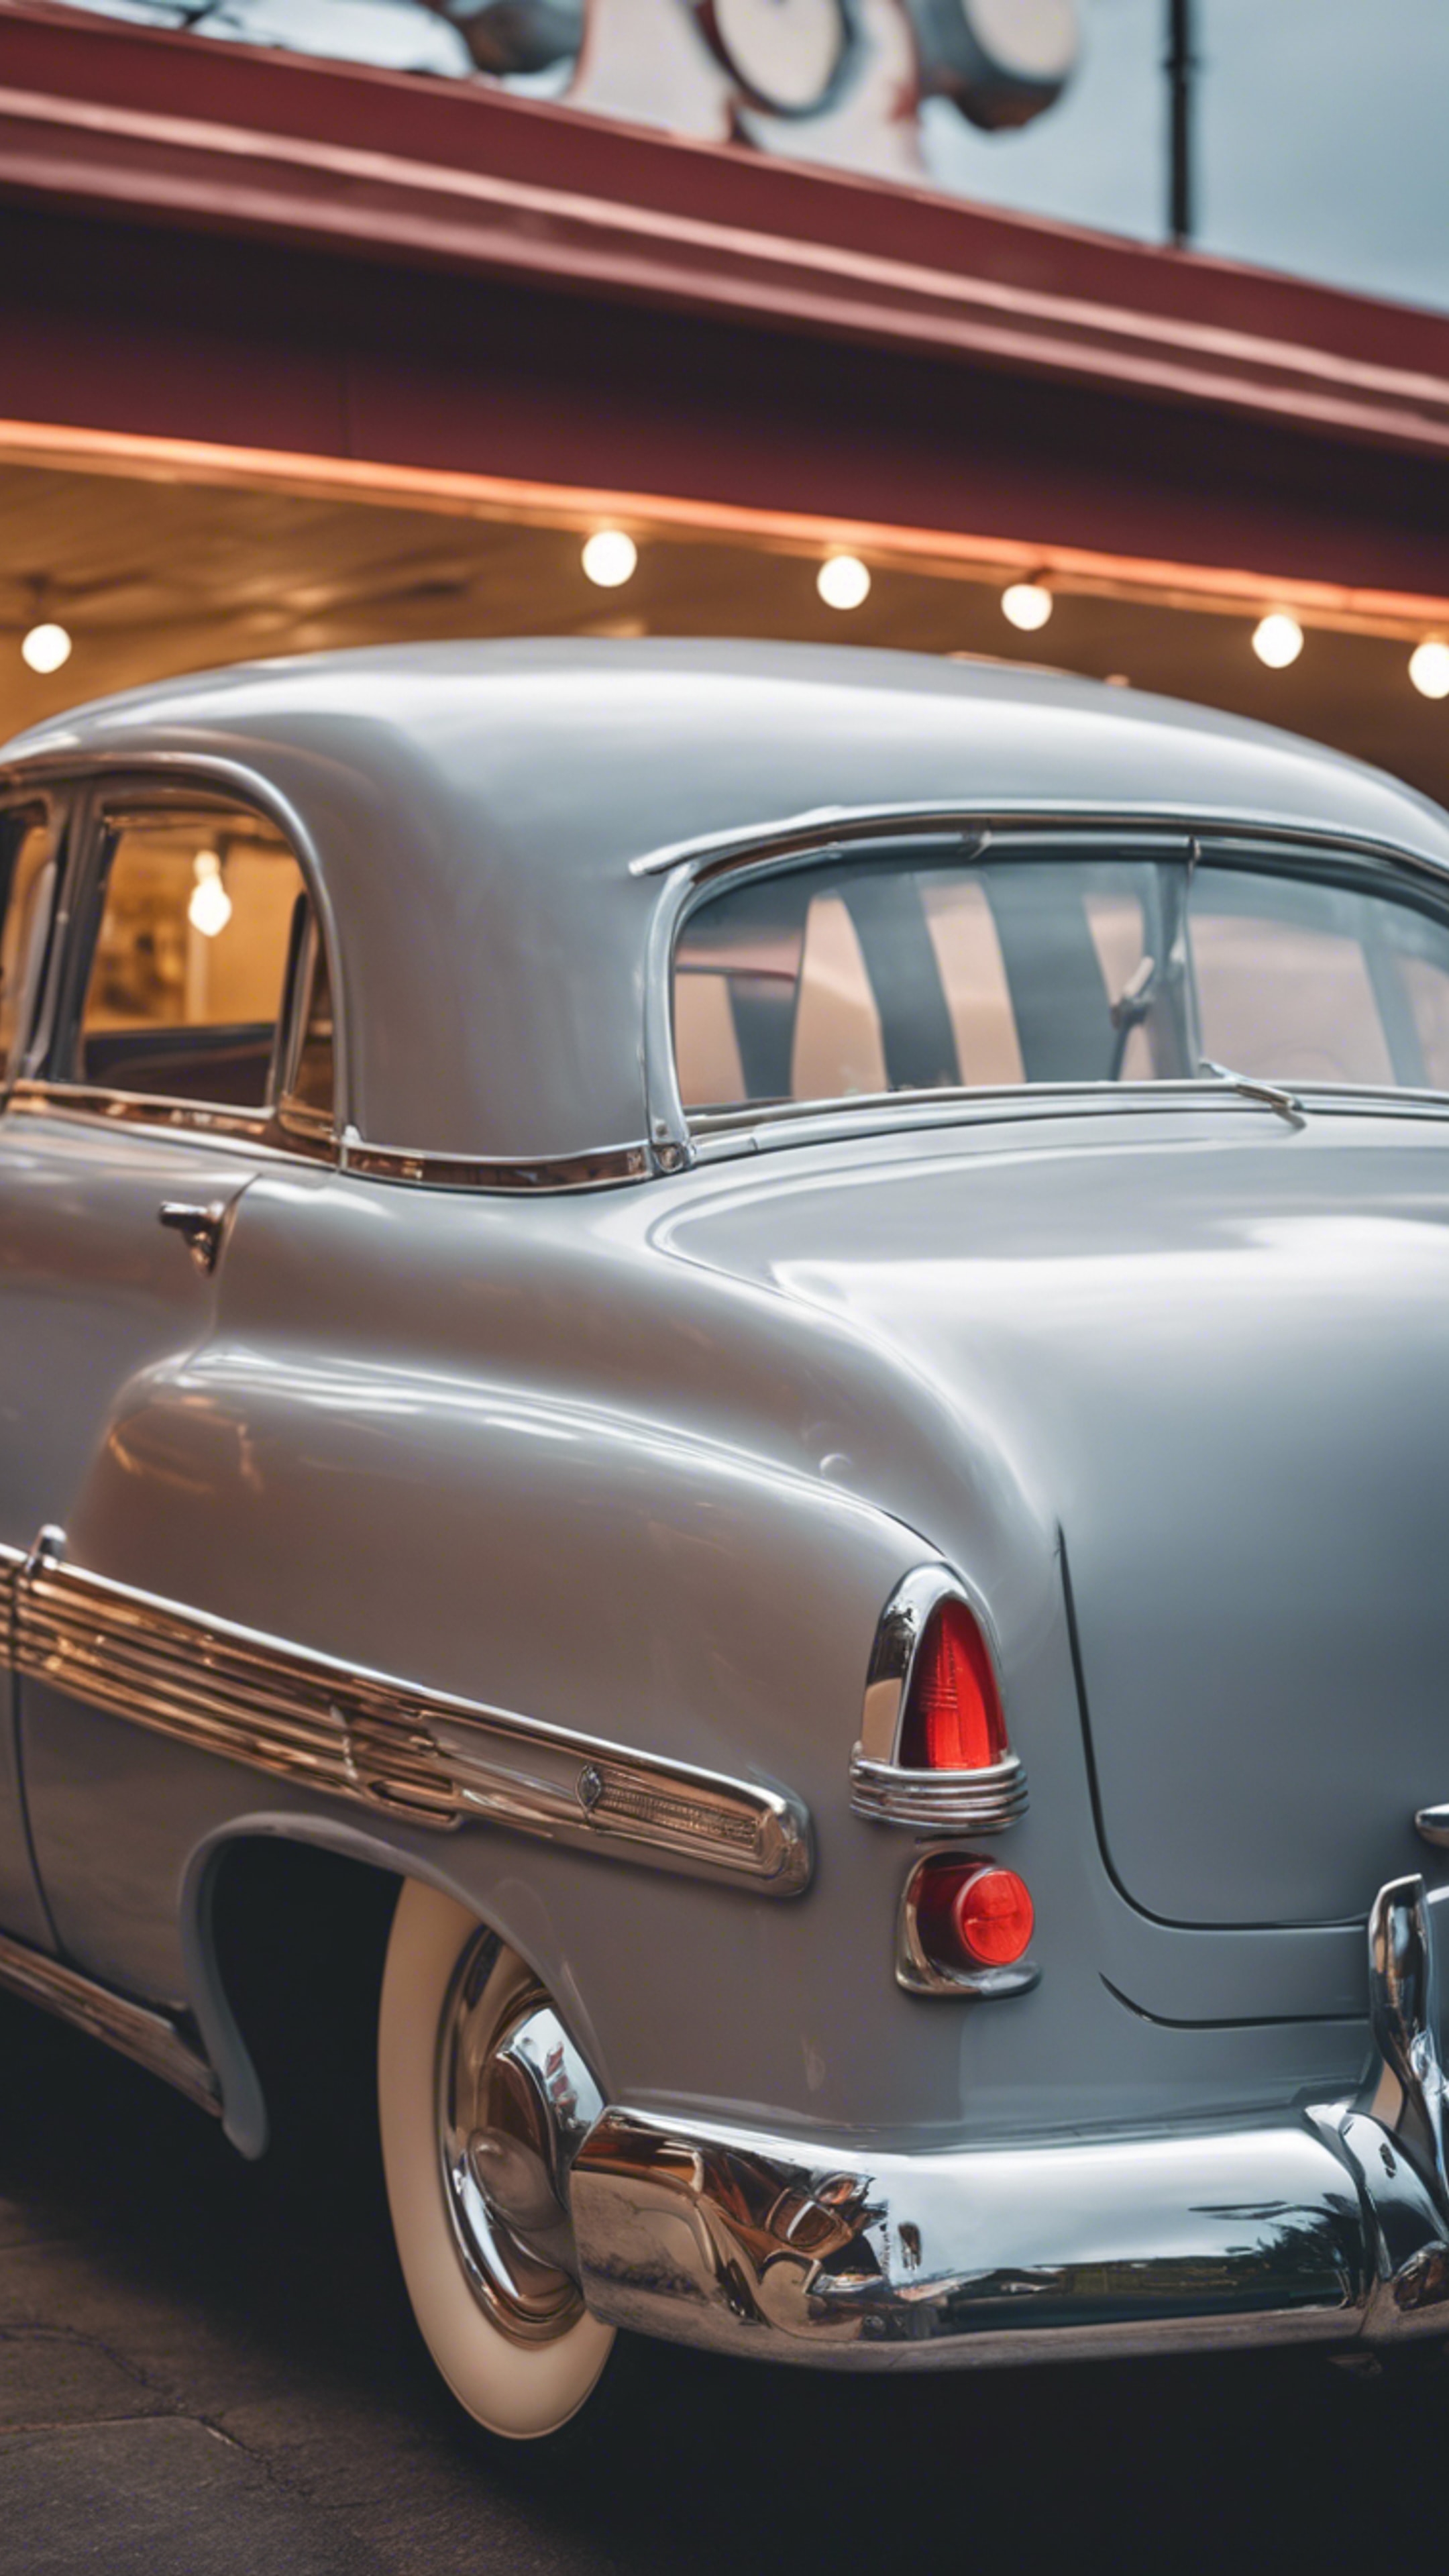 A vintage 1950s car, painted in light gray, parked outside a quirky roadside diner.壁紙[6f1ad1f93eb7446a85d1]